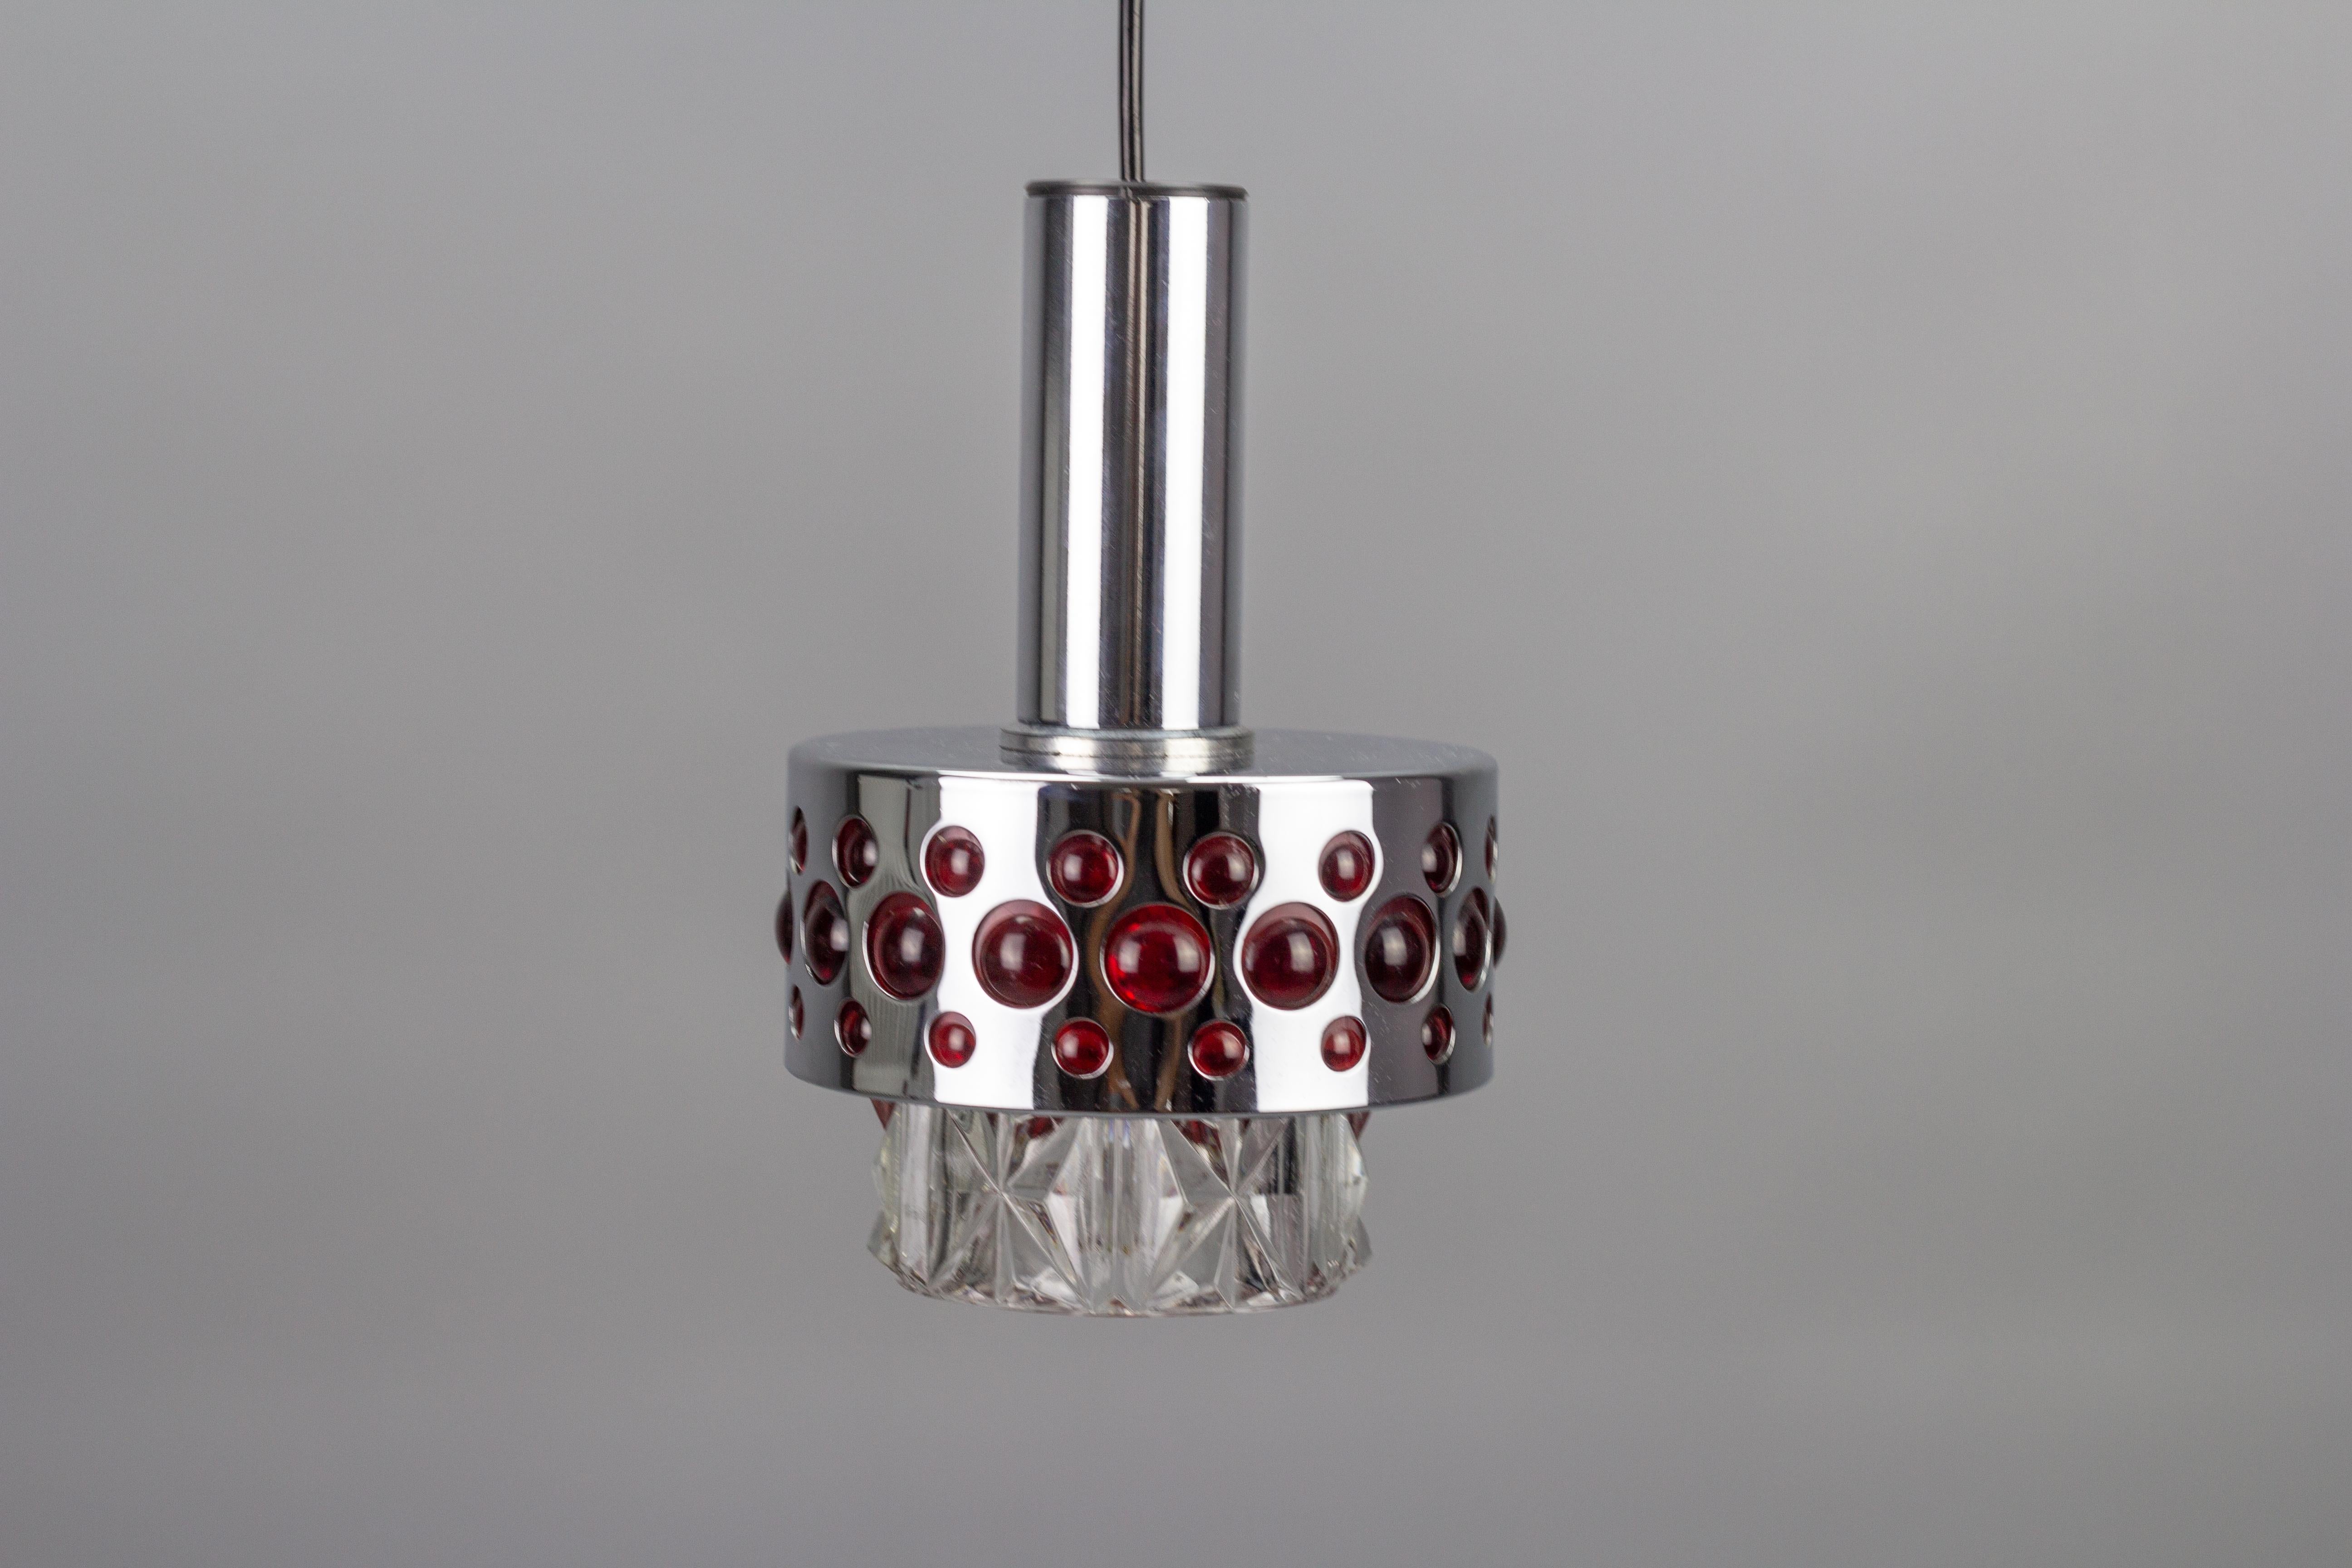 German Mid-Century Modern Chrome and Red Pendant Light by Richard Essig, 1970s For Sale 5